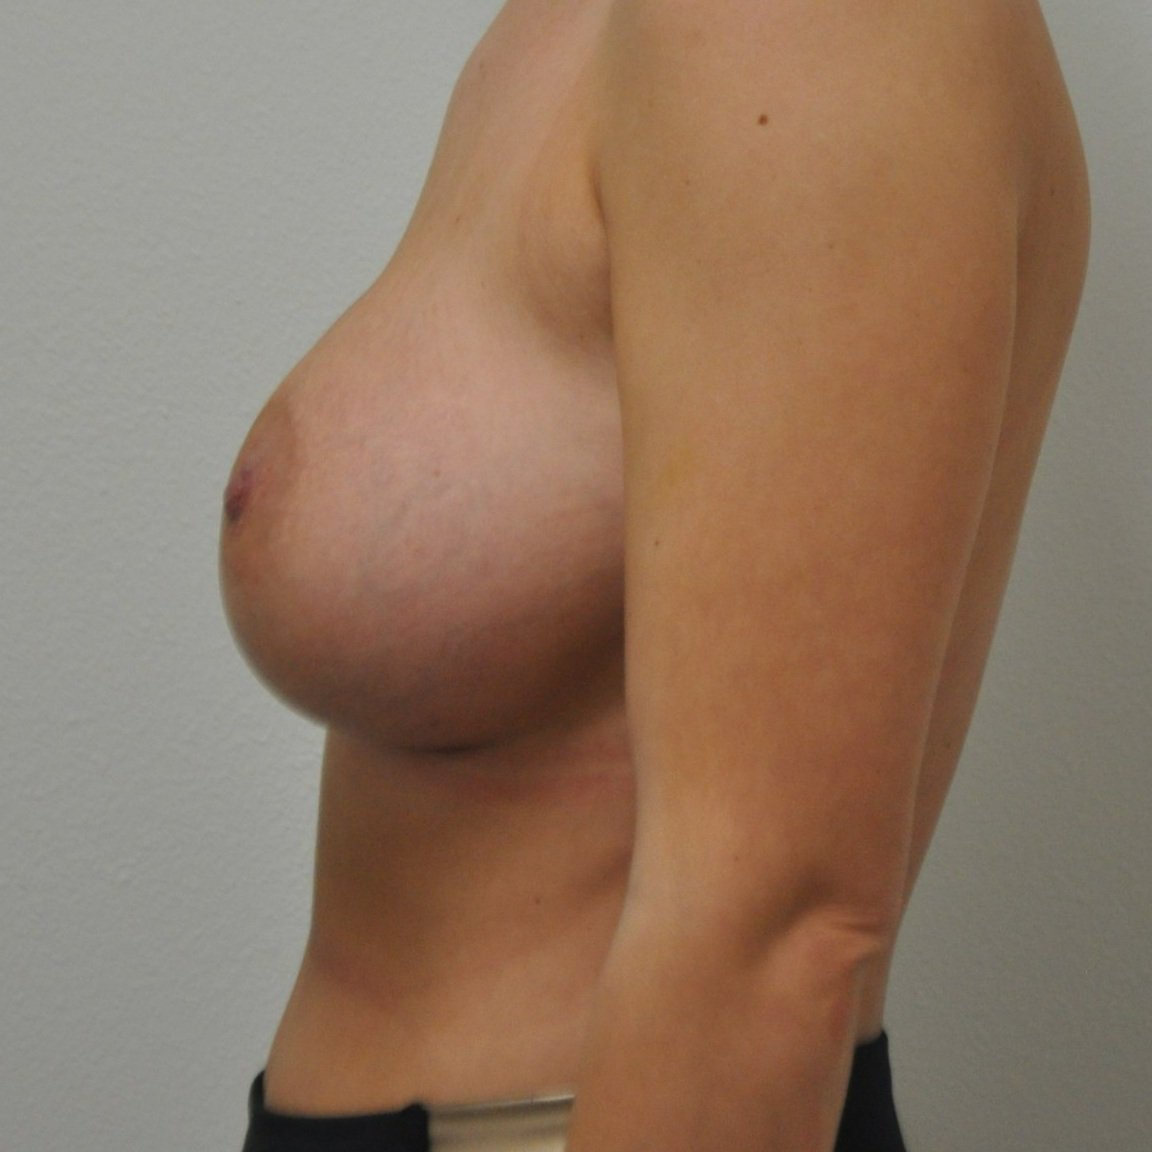 breast-lateral-left-11.04.2021-26894991.jpg